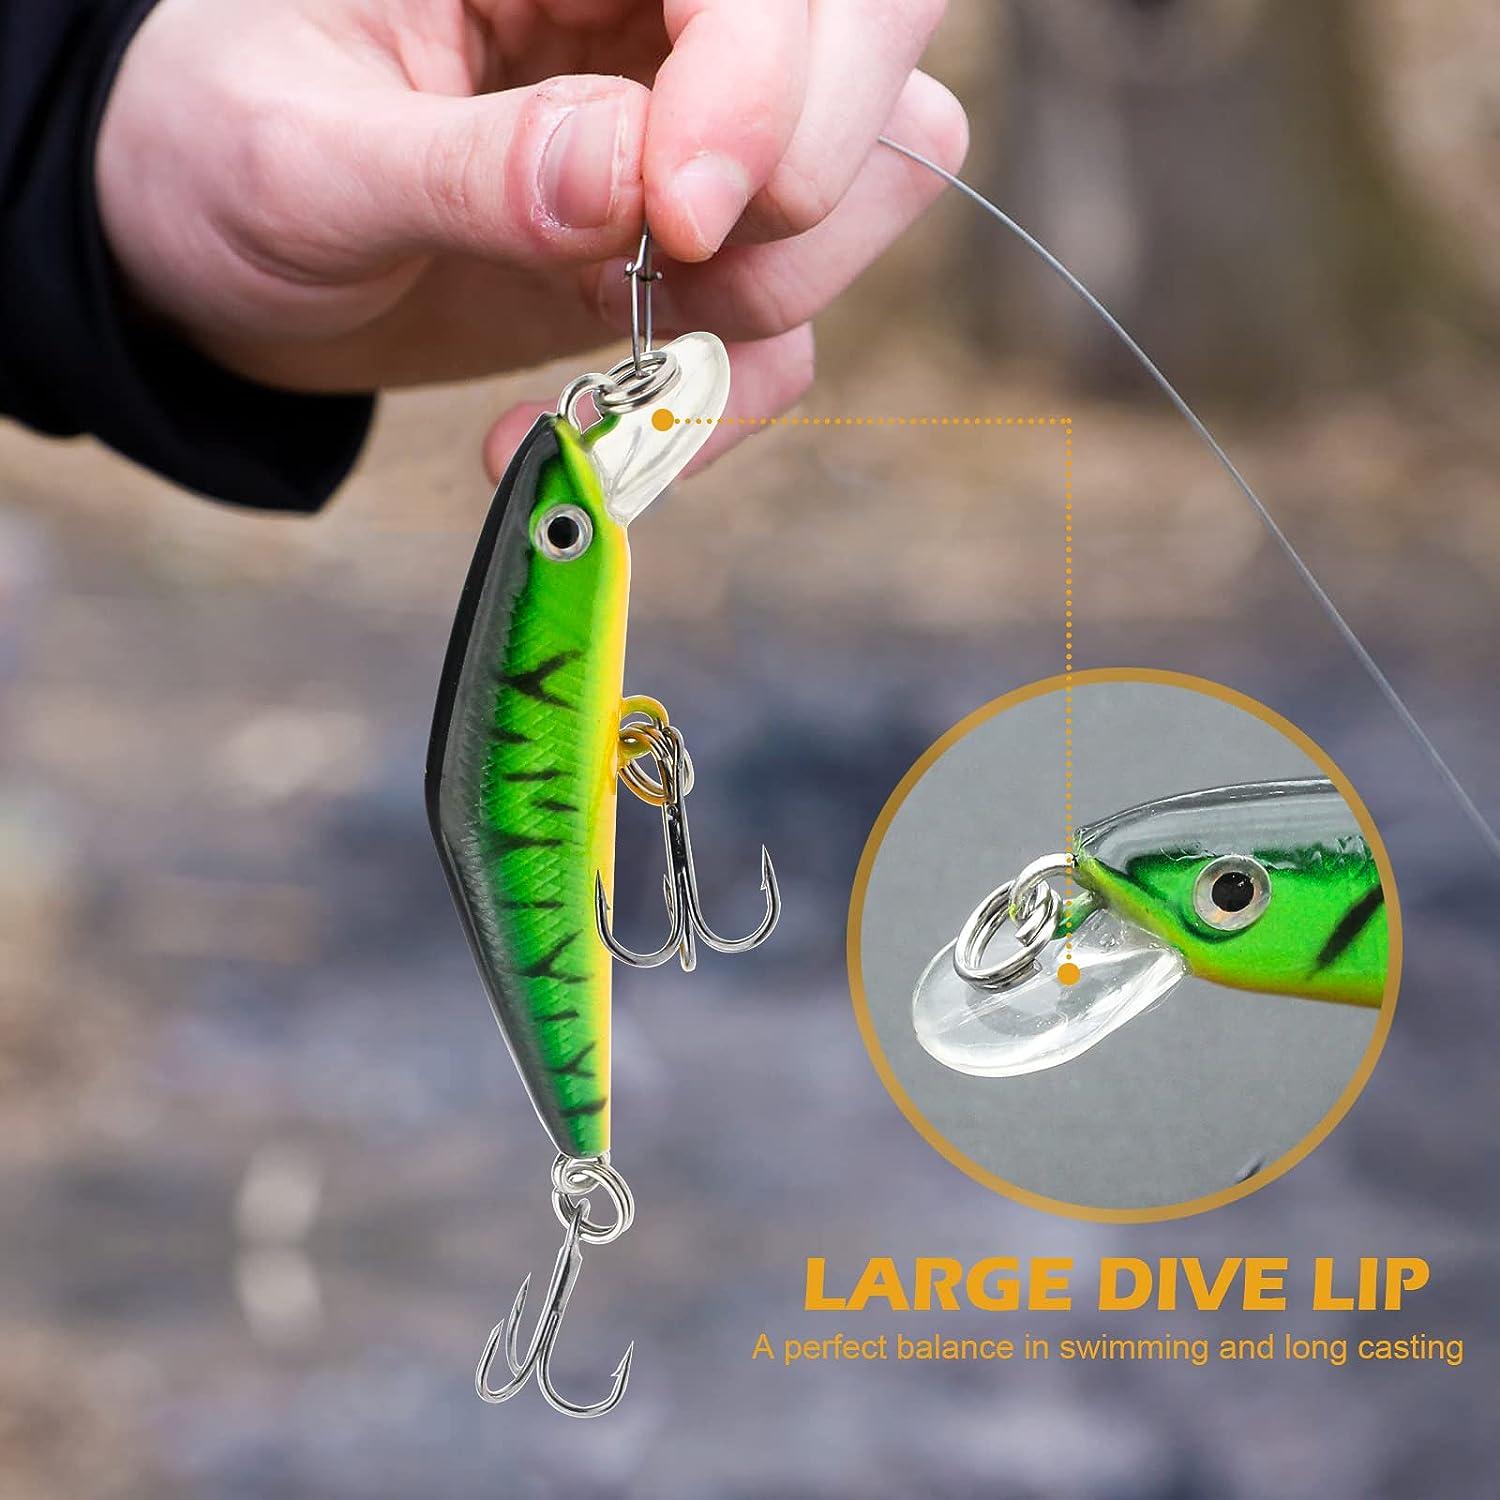 12Pcs Spinners for Fishing, Metal Fishing Lures with Plastic Case, Multi  Colored Pike Lure, Pike Fishing Lures for Trout, Pike, Bass and Salmon